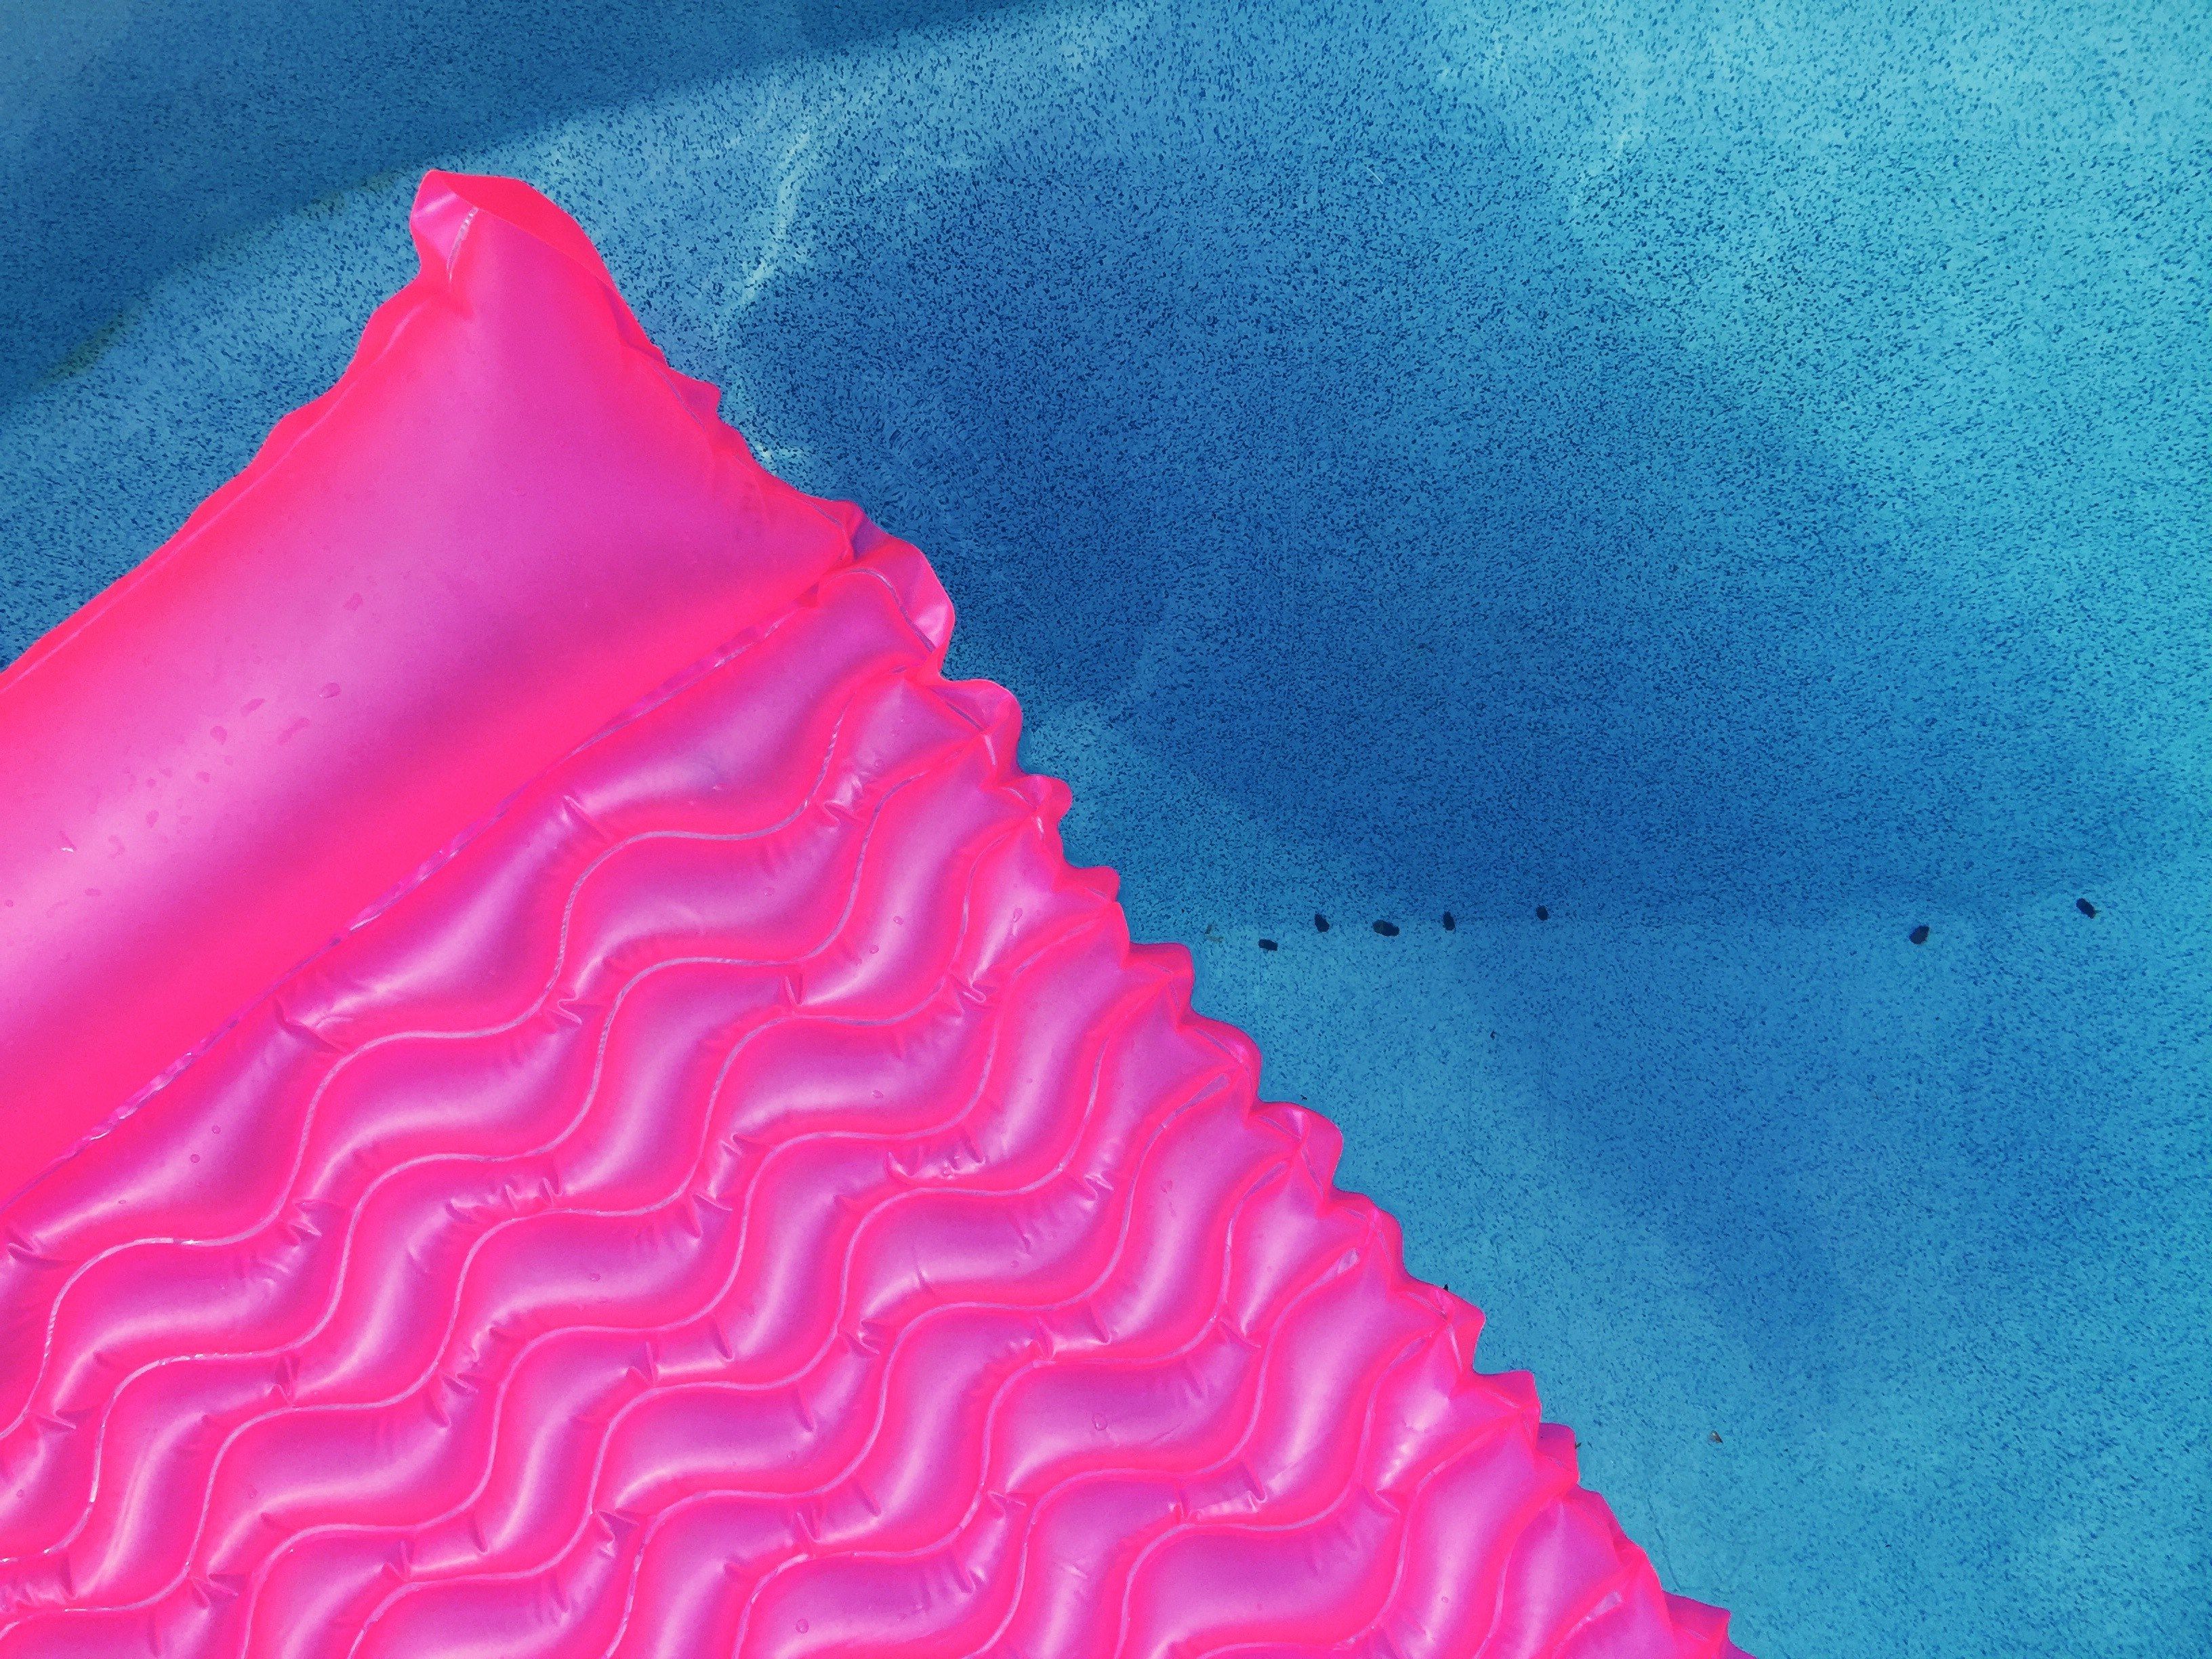 Wallpaper / bright pink pool floaties gliding along